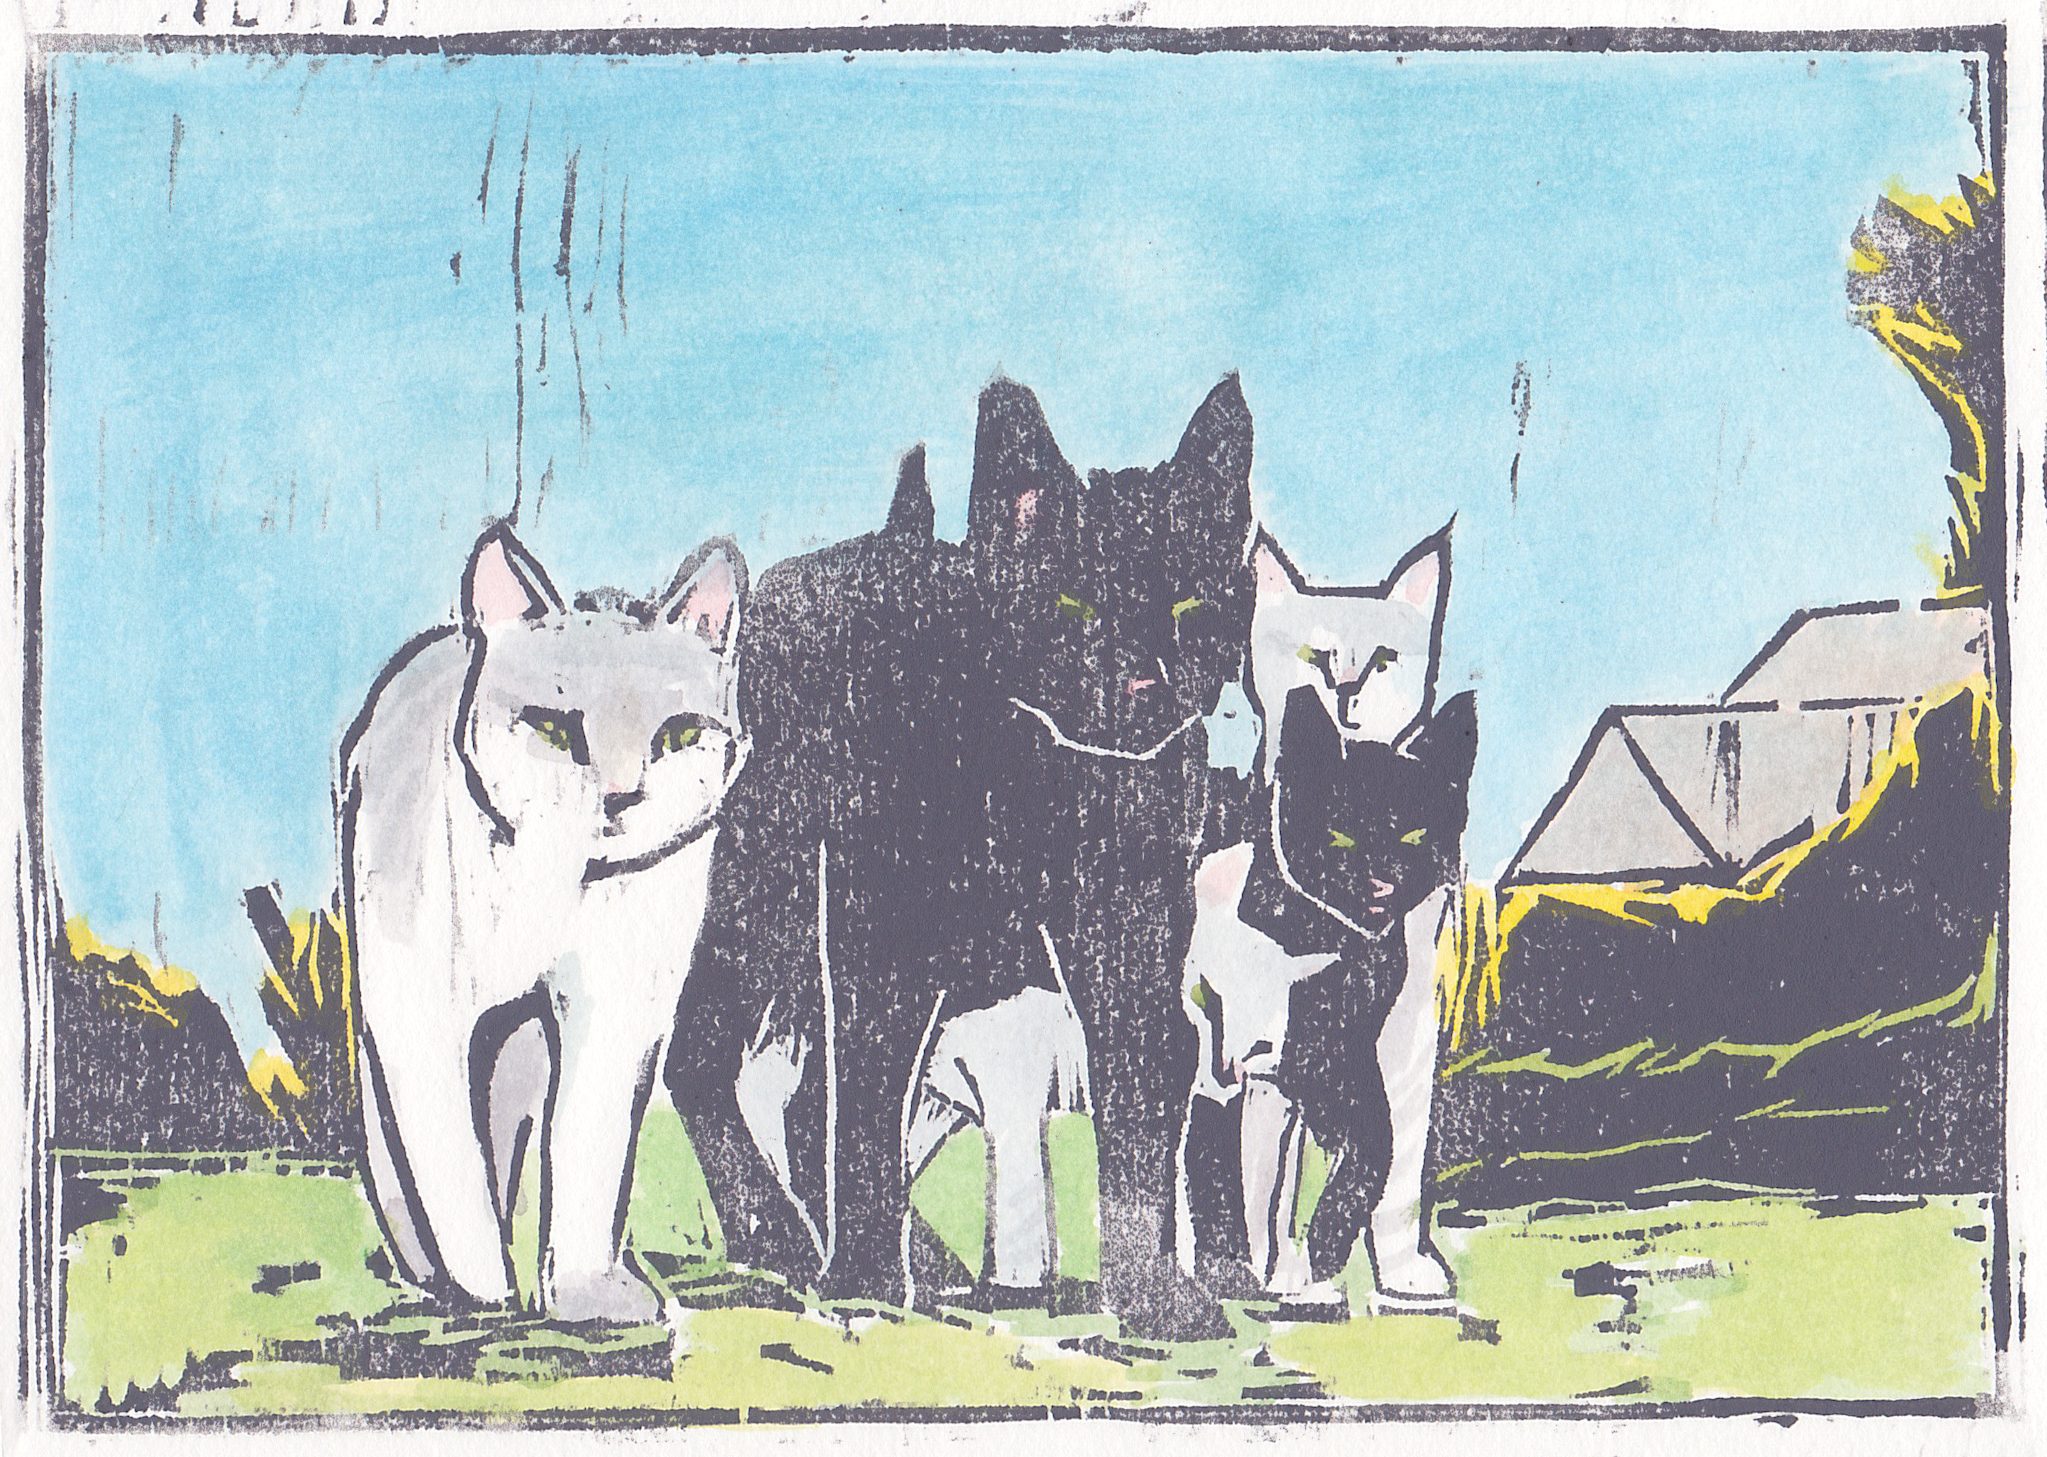   alley cats  woodblock print with hand-coloring 5x7" 2019  private collection Manasquan, NJ 